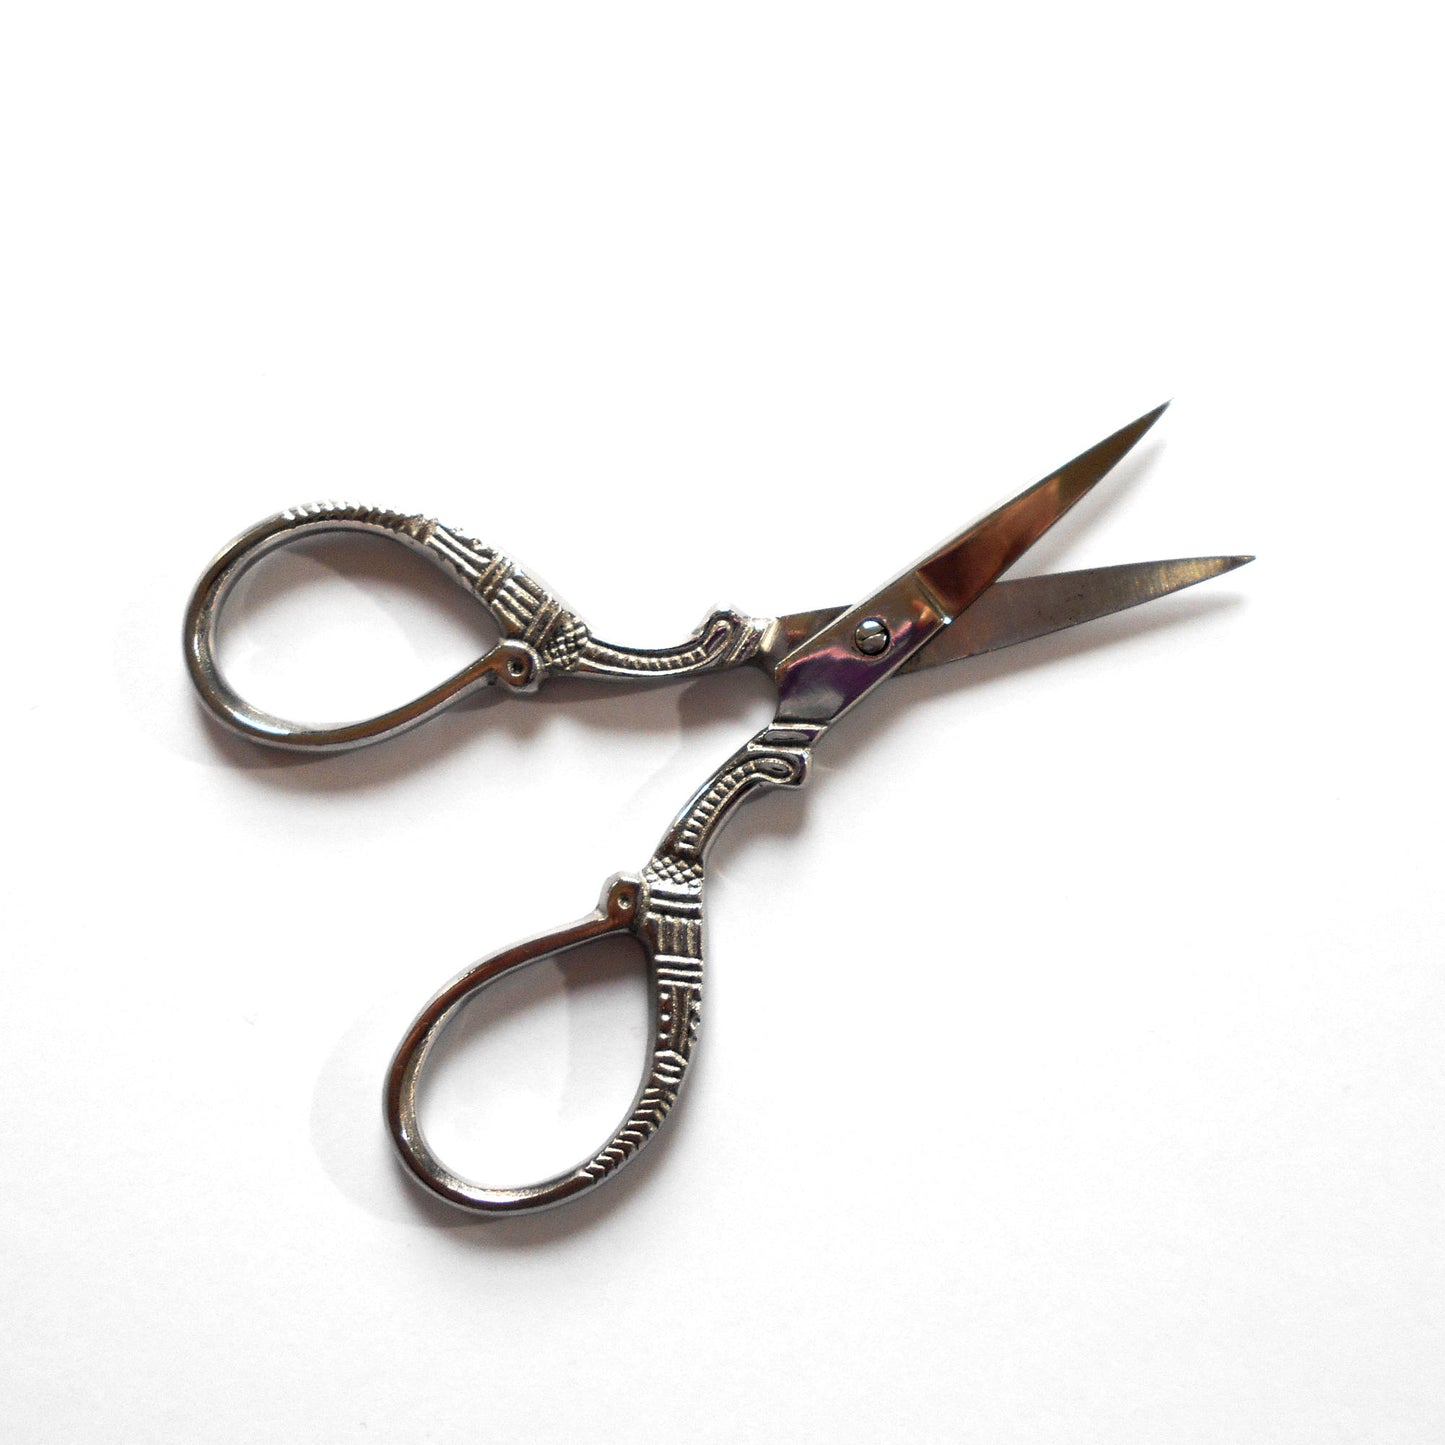 Engraved Sewing Scissors